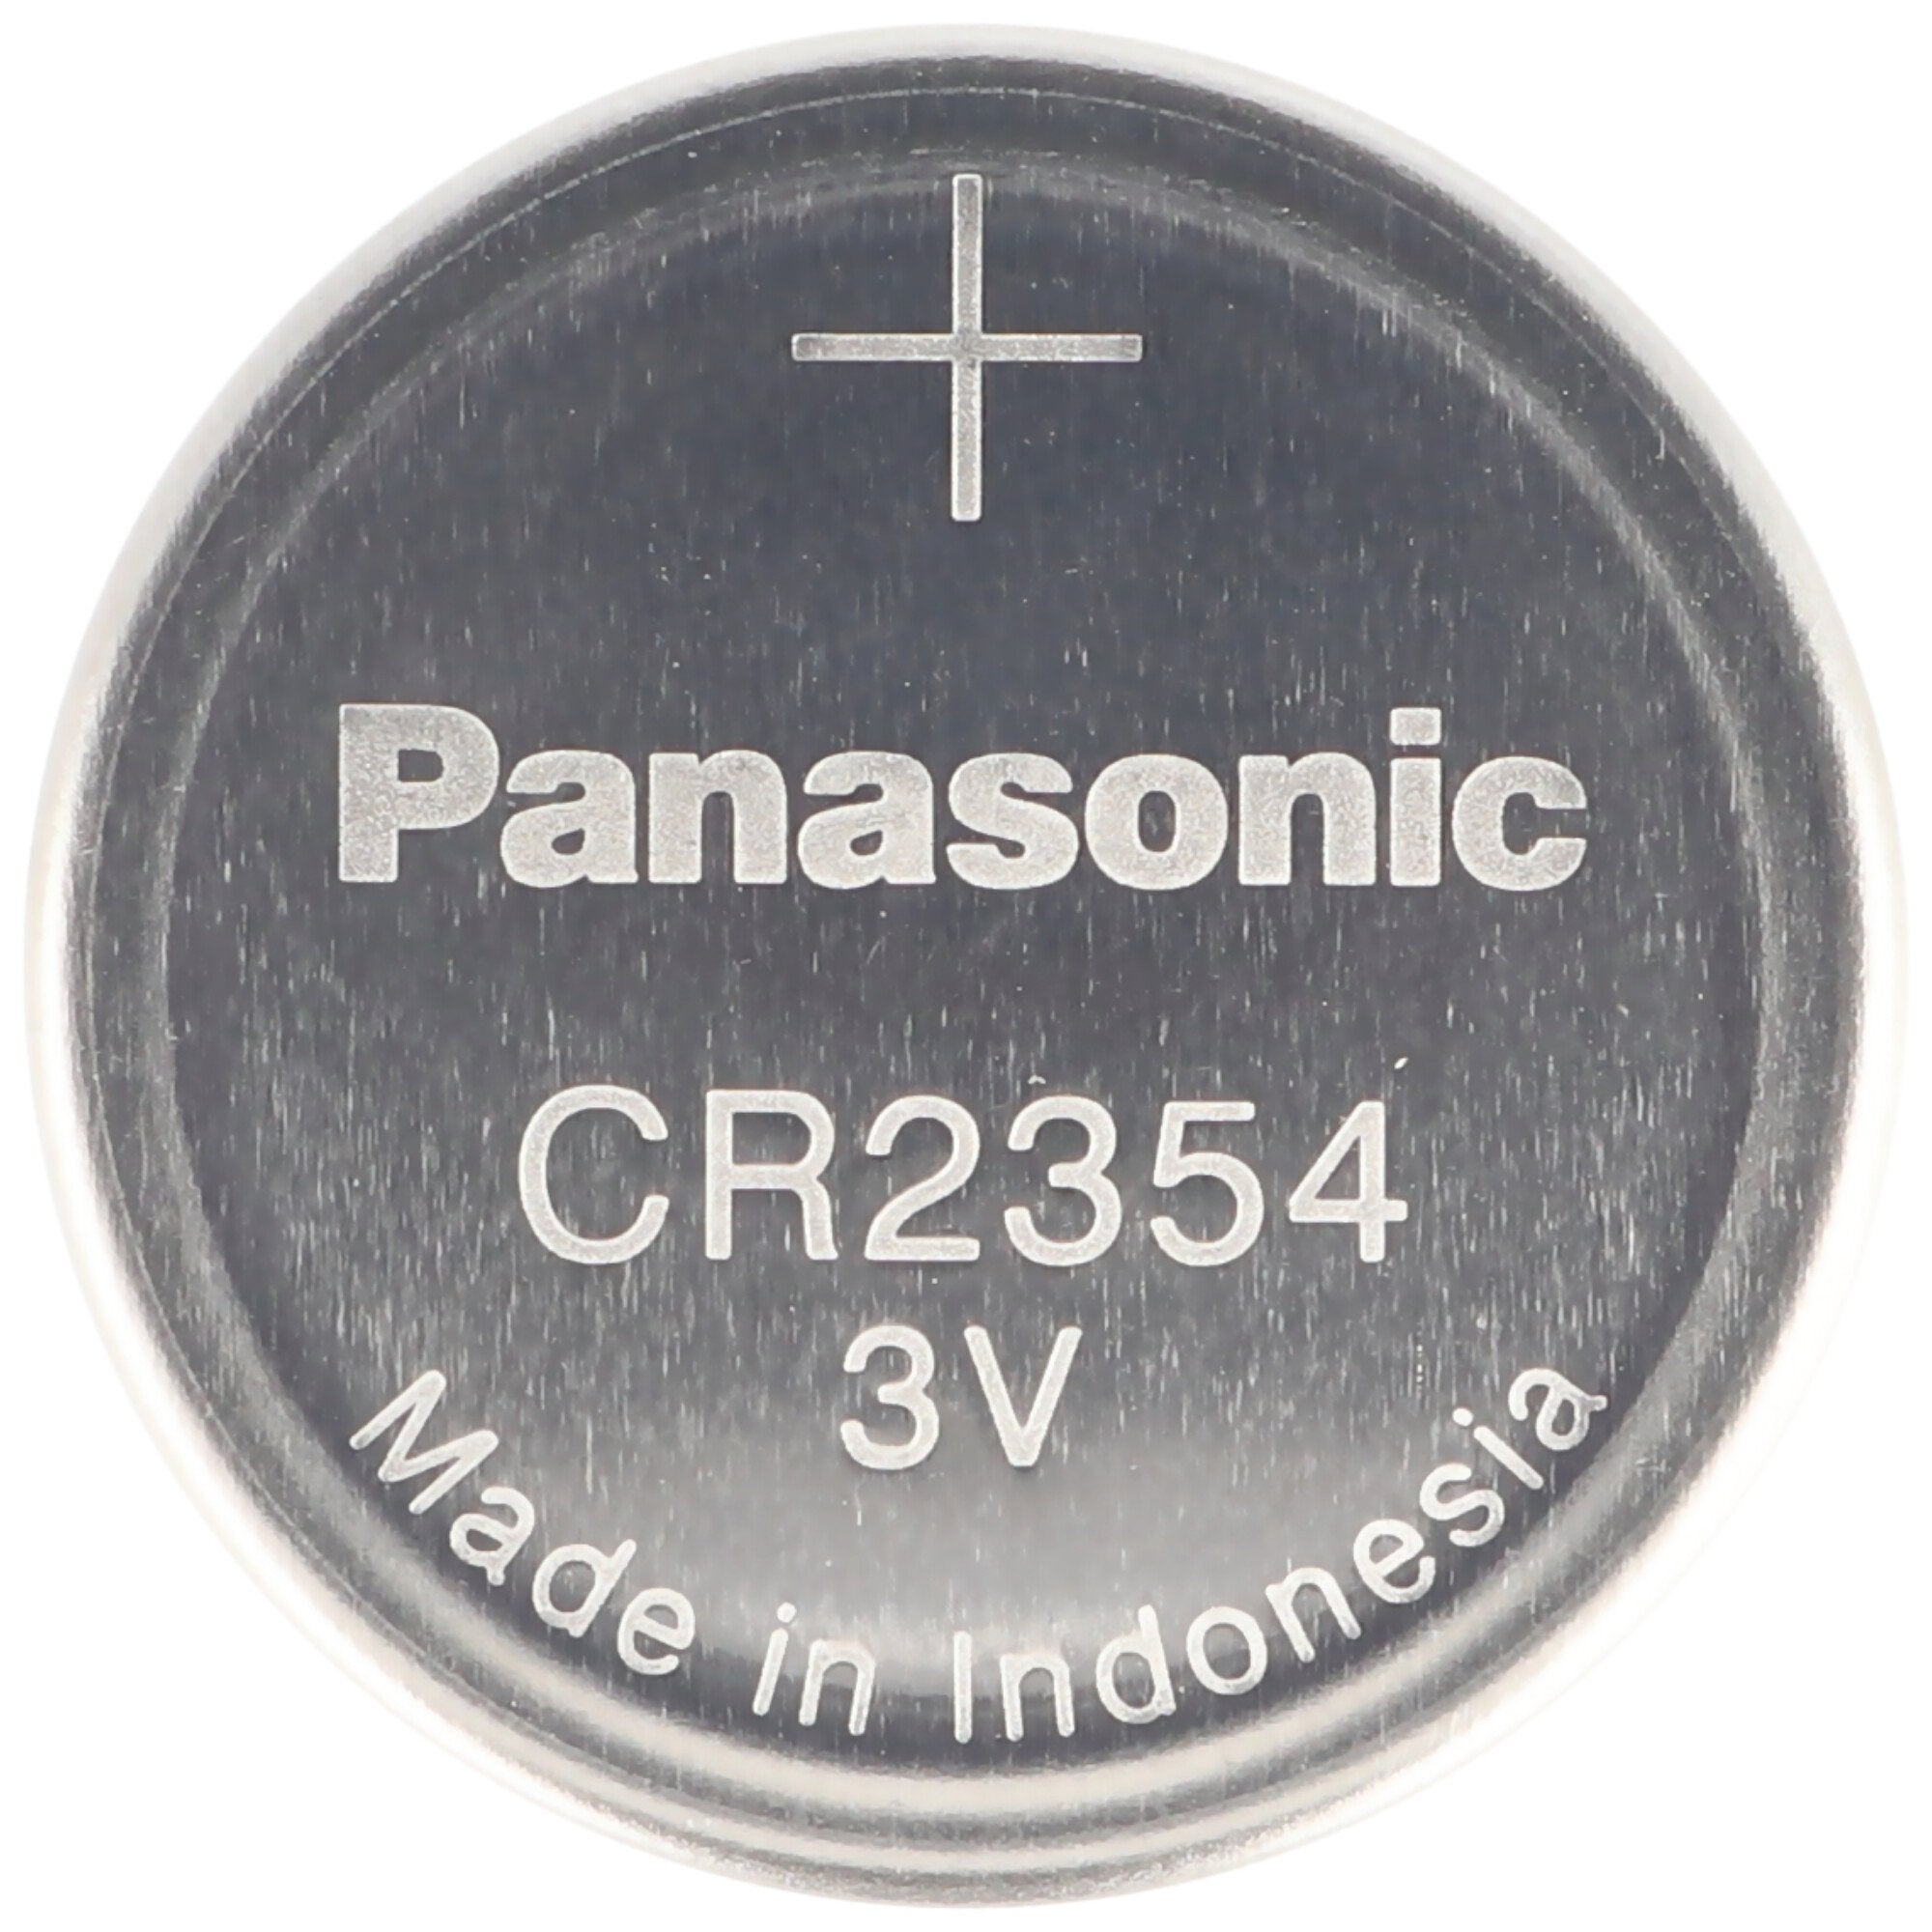 Panasonic CR2354 lithium battery with recess at the negative pole